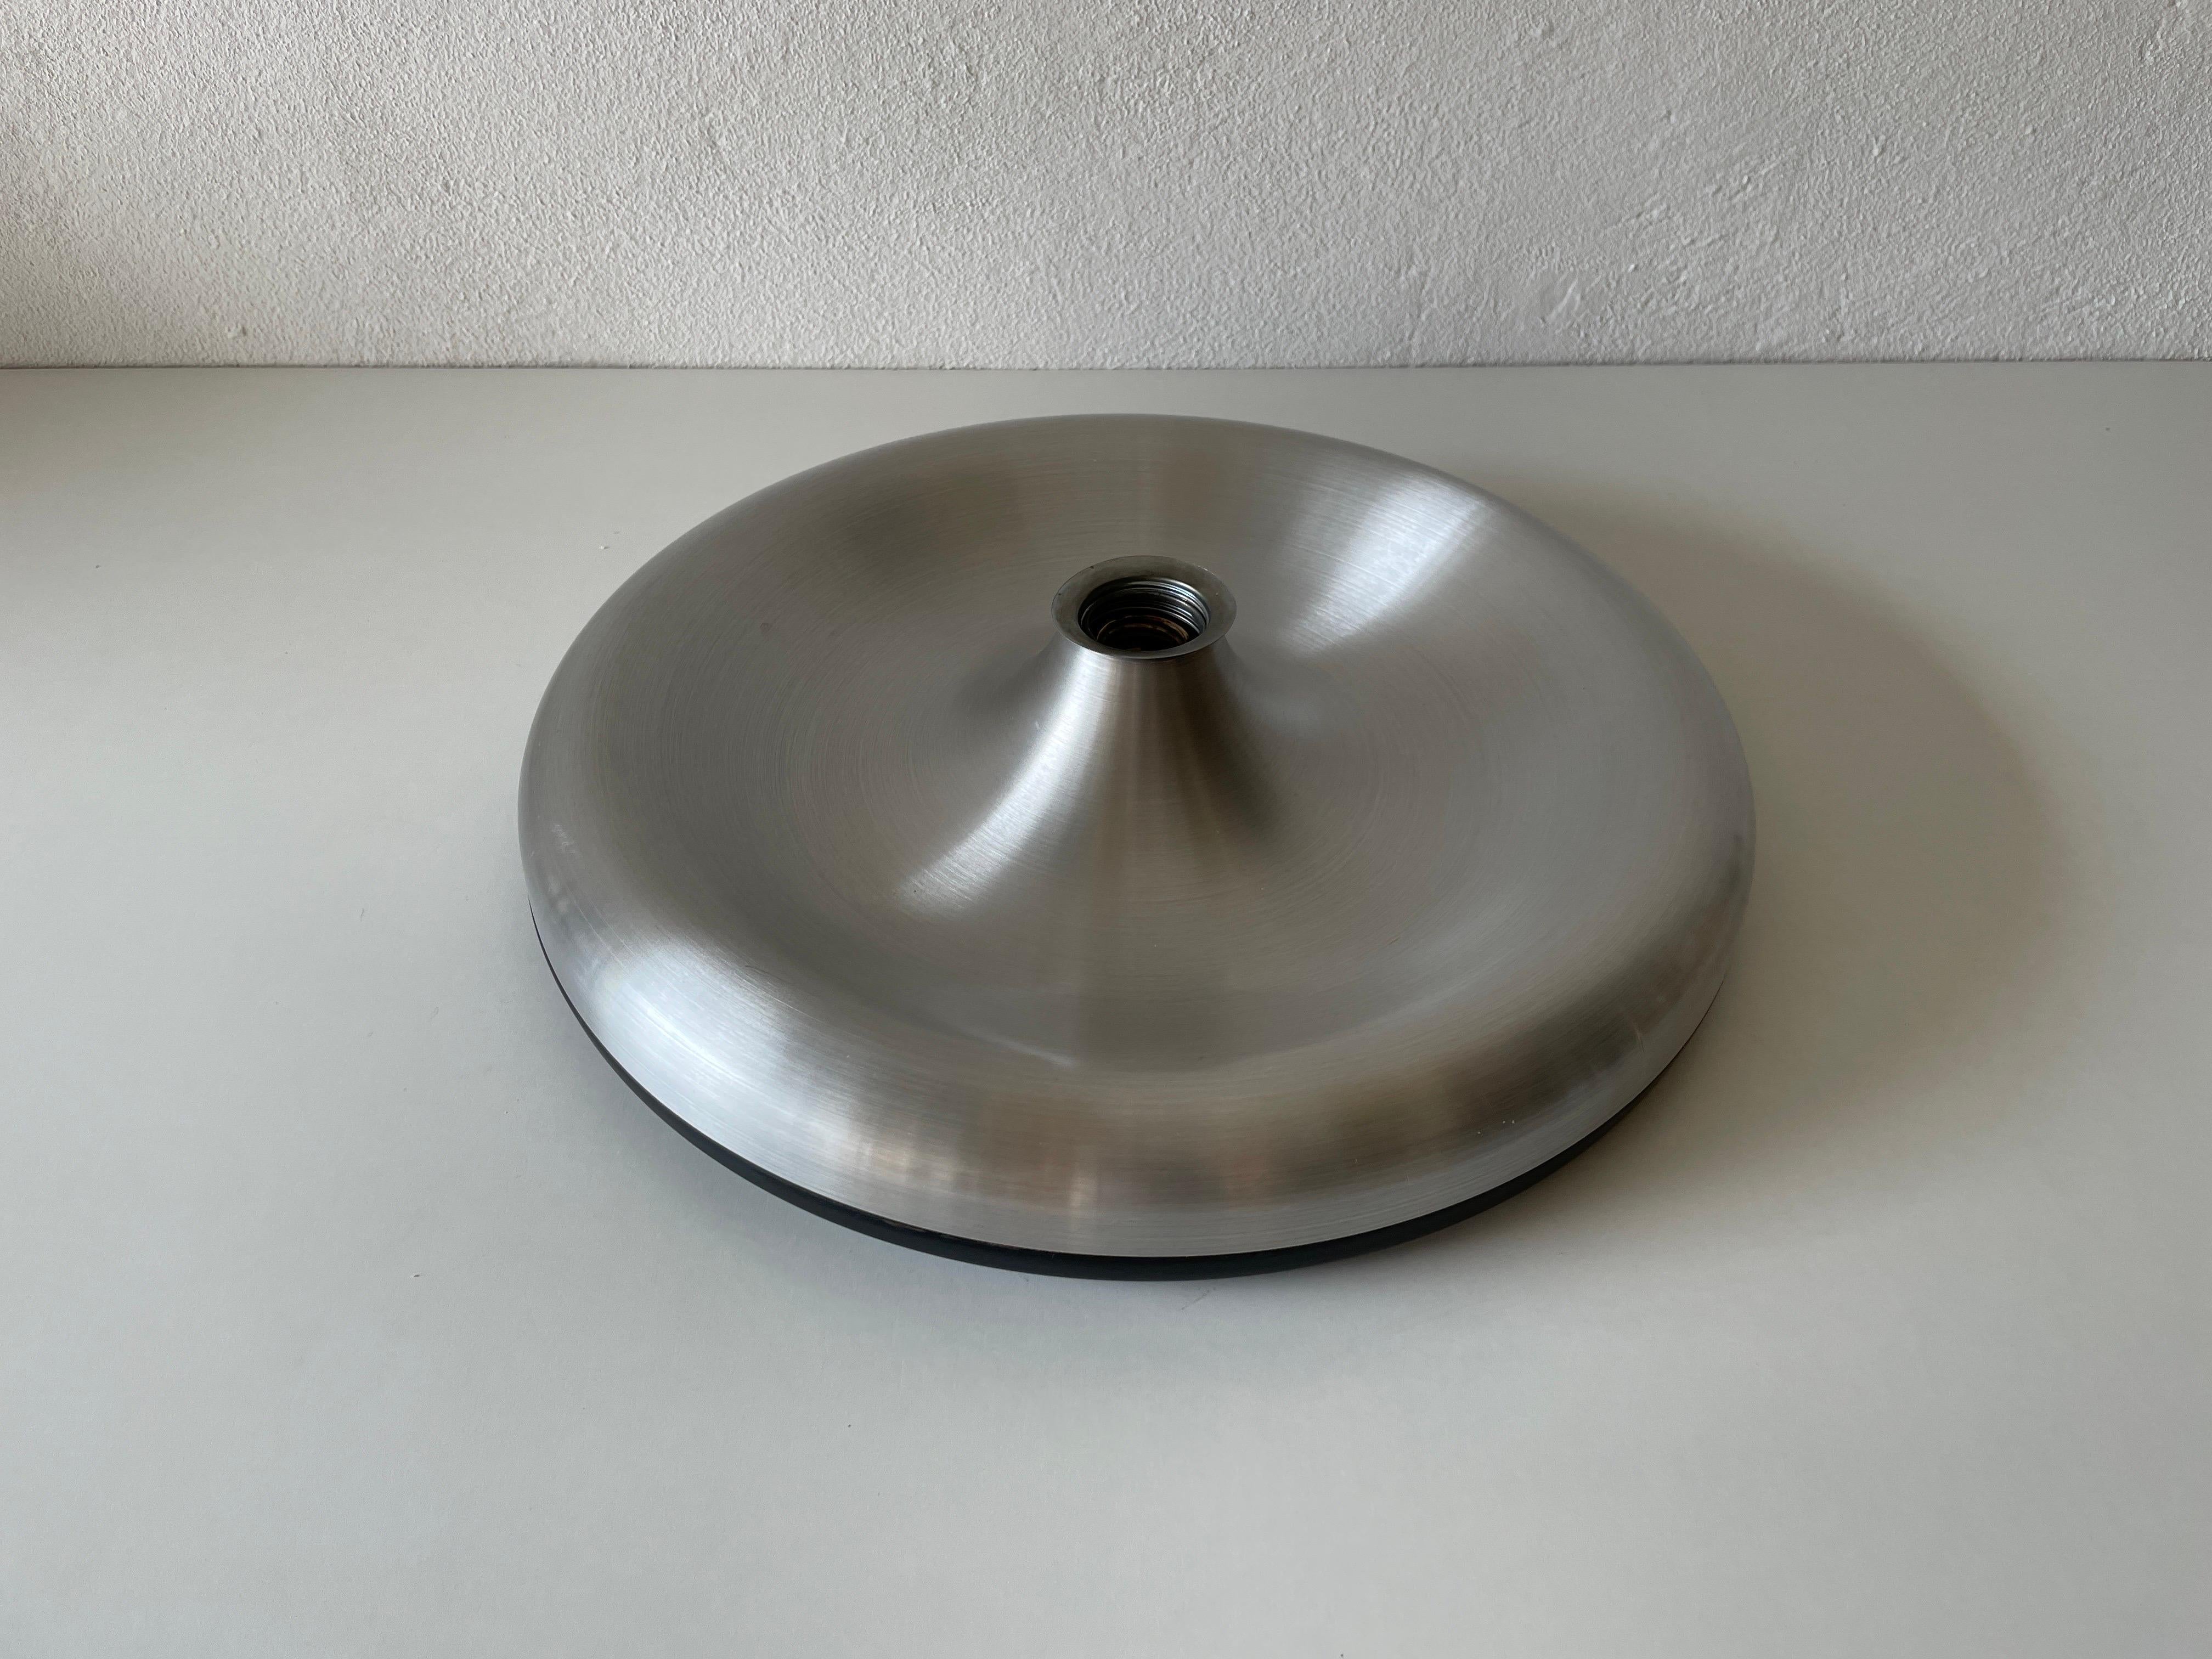 Grey Aluminum and Black Metal Space Age Disc Design Flush Mount, 1970s, Germany

Manufactured in Germany
Lamps are in perfect condition.
This lamp works with E27standard light bulbs.
Wired and suitable to use in all countries.


Measurements: